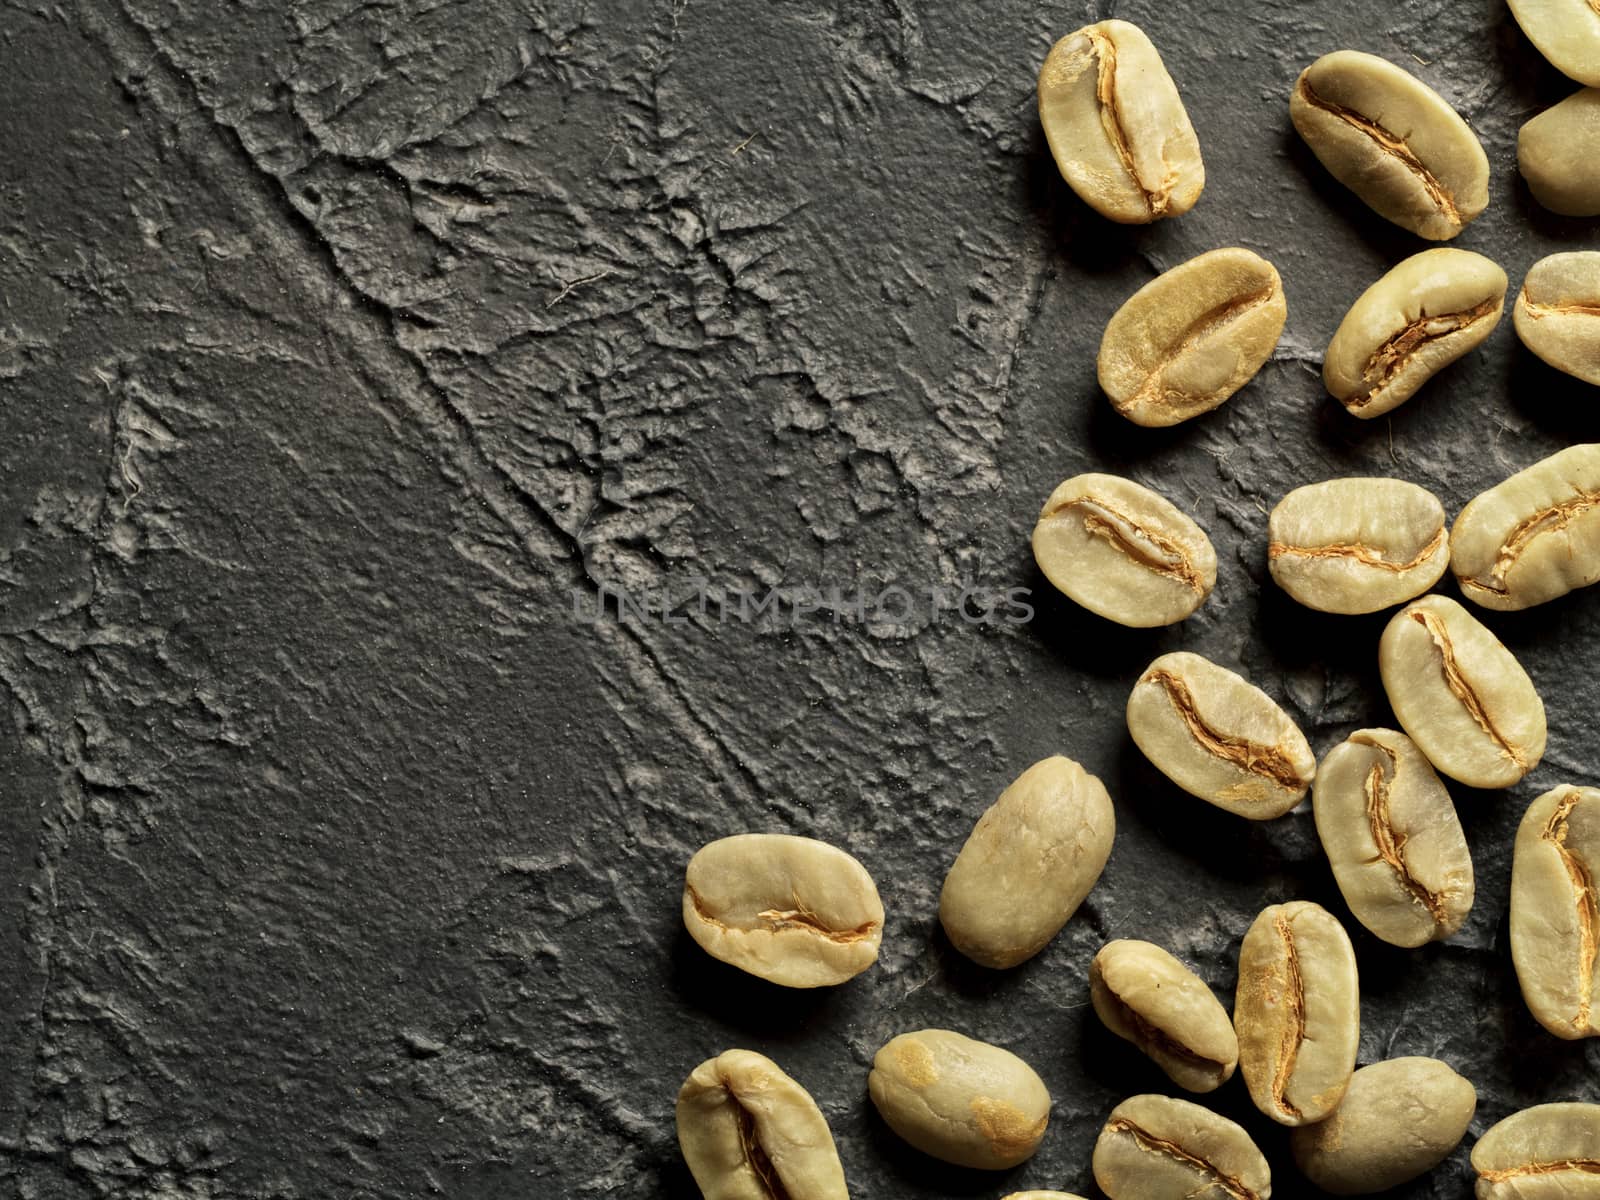 Green coffee beans on dark concrete background. Top view or flat lay. Copy space. Image with natural colors